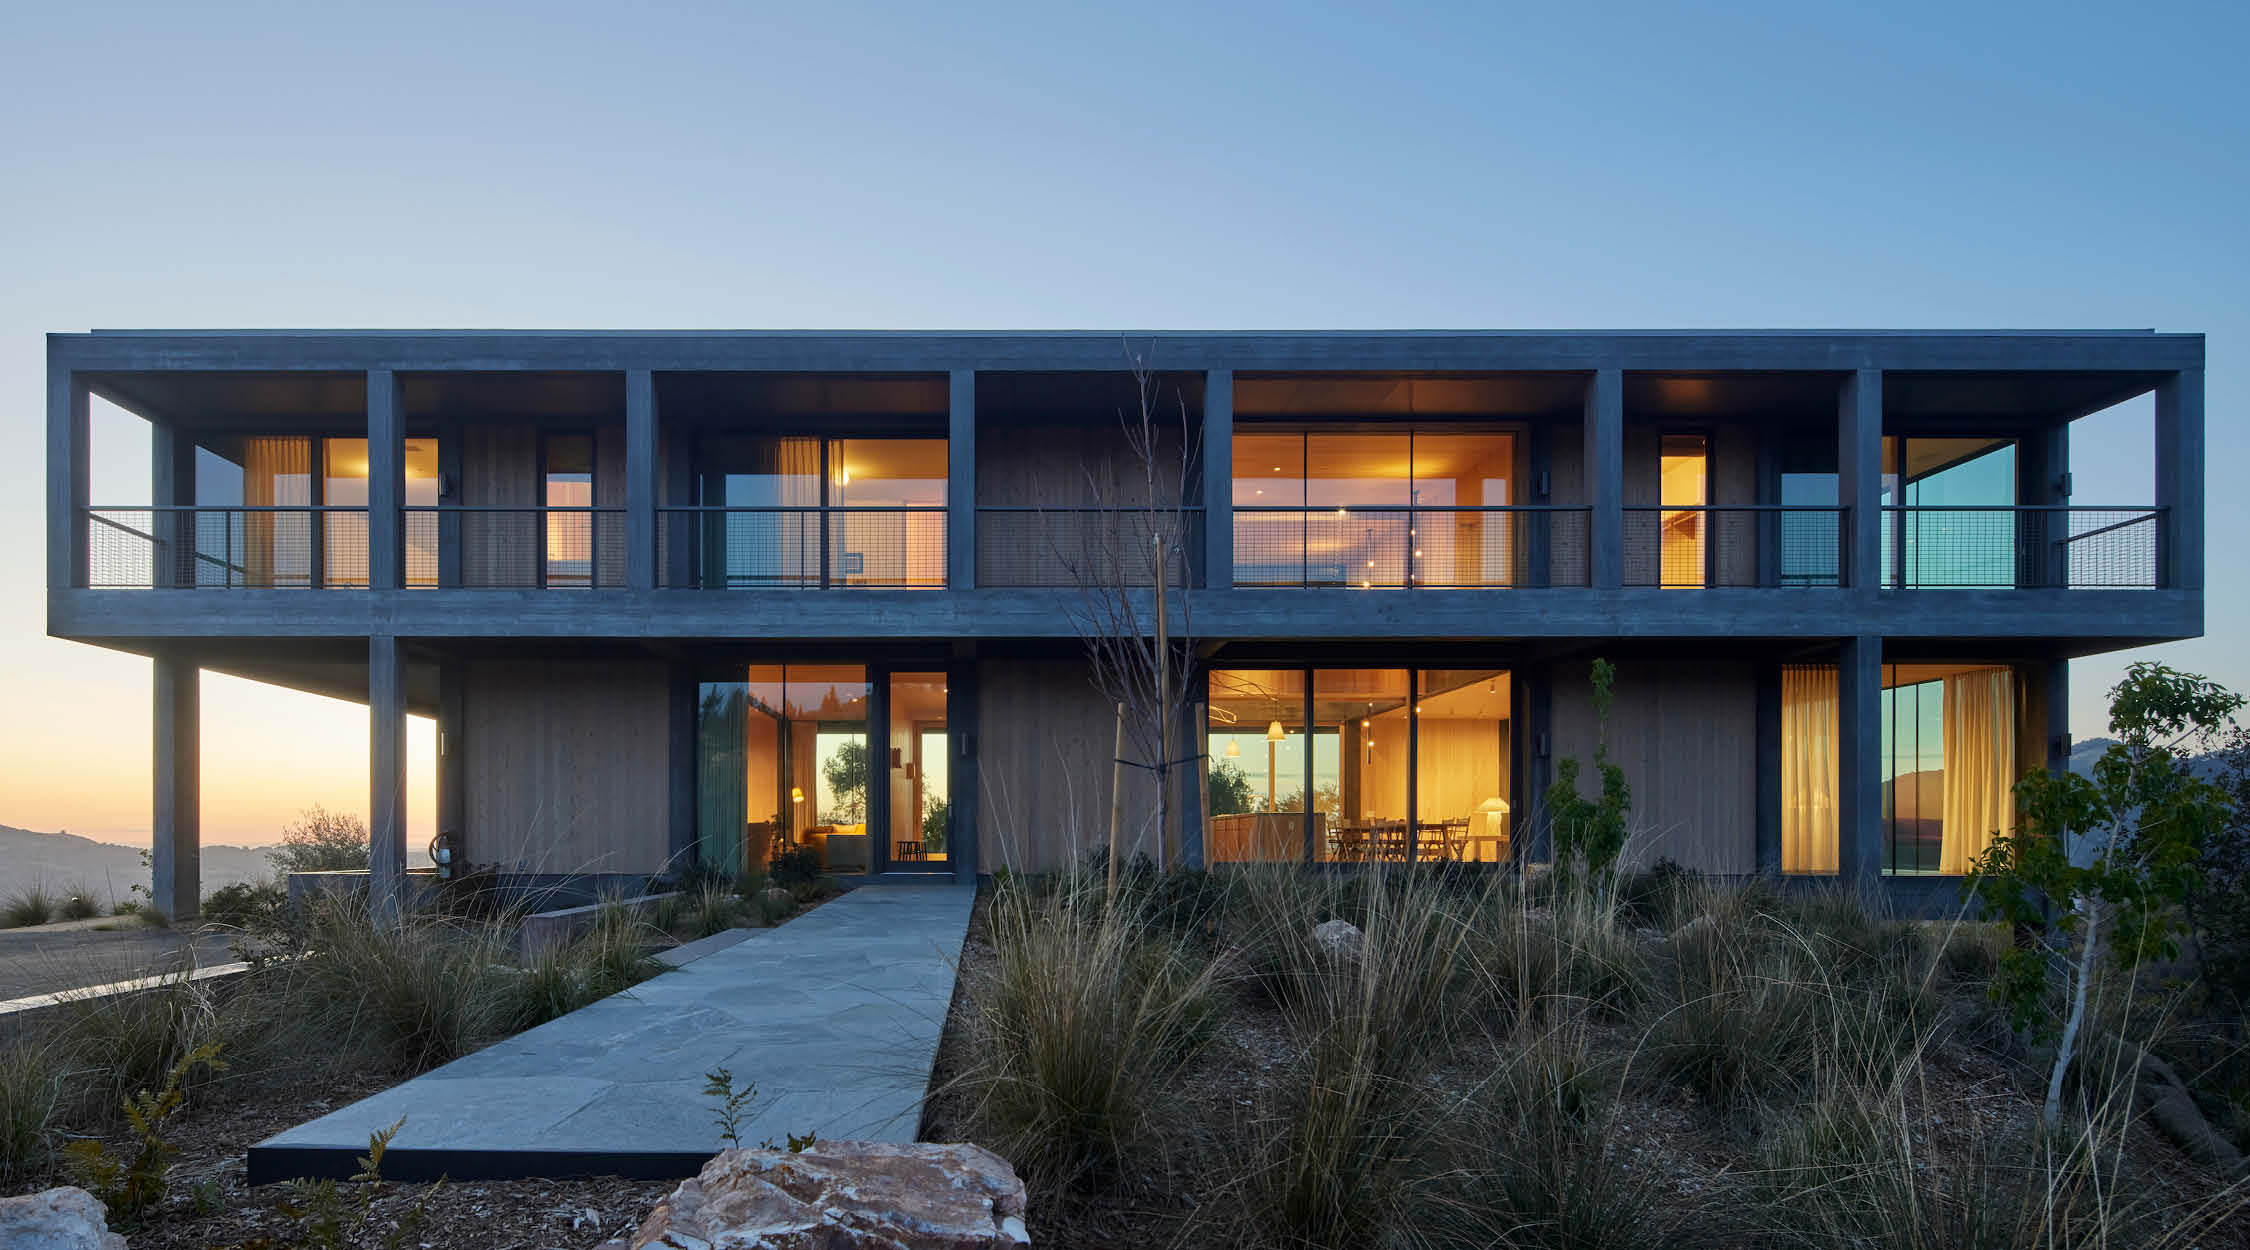 A modern two storey house design made of concrete and wooden accents featuring a grid system.